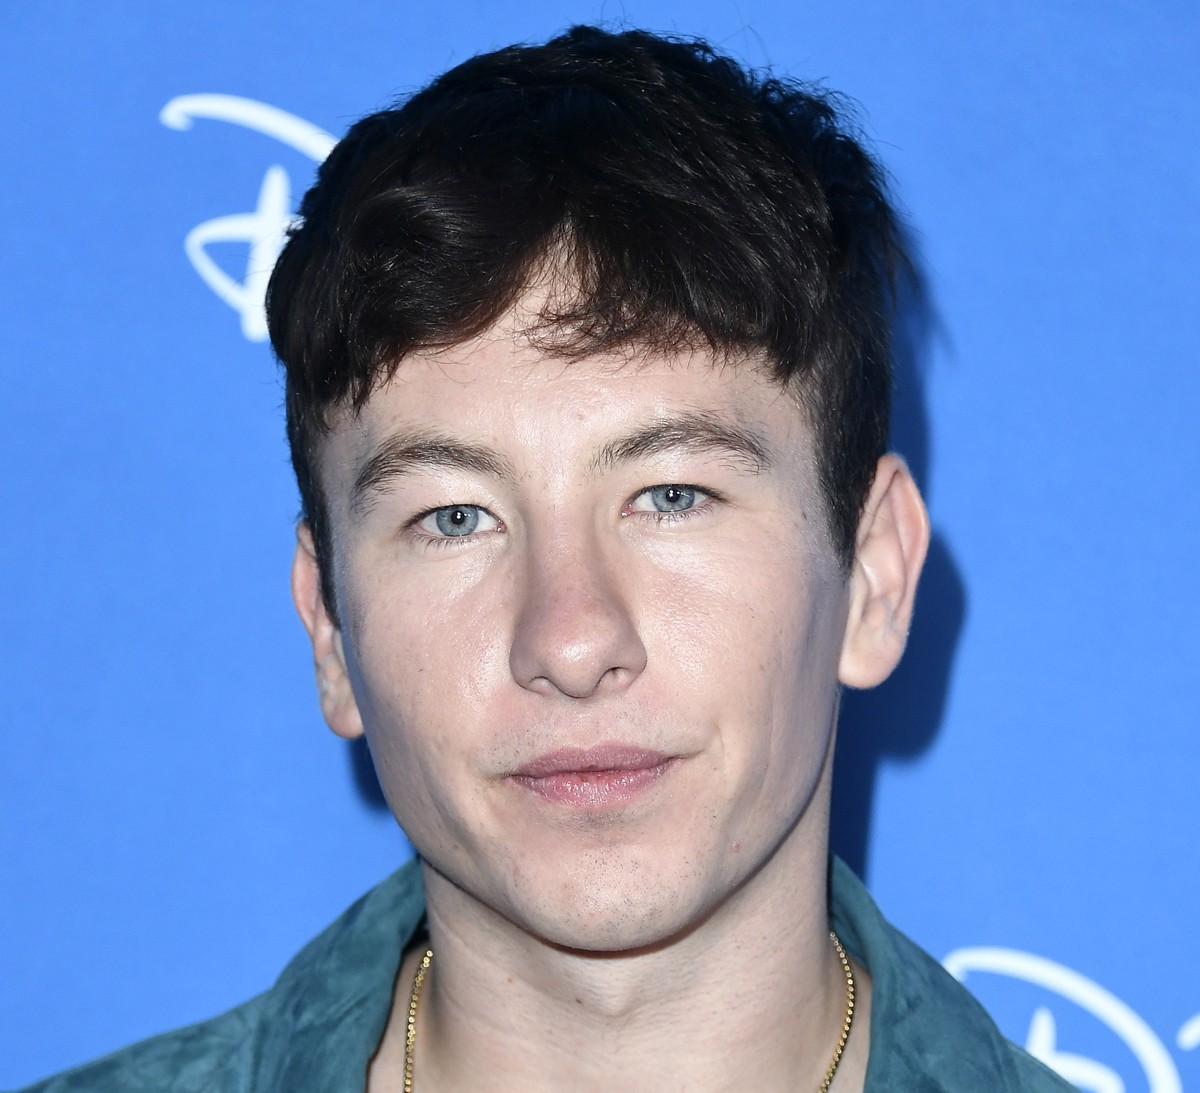 ANAHEIM, CALIFORNIA - AUGUST 24: Barry Keoghan attends Go Behind The Scenes with Walt Disney Studios during D23 Expo 2019 at Anaheim Convention Center on August 24, 2019 in Anaheim, California. (Photo by Frazer Harrison/Getty Images) (Foto: Getty Images)